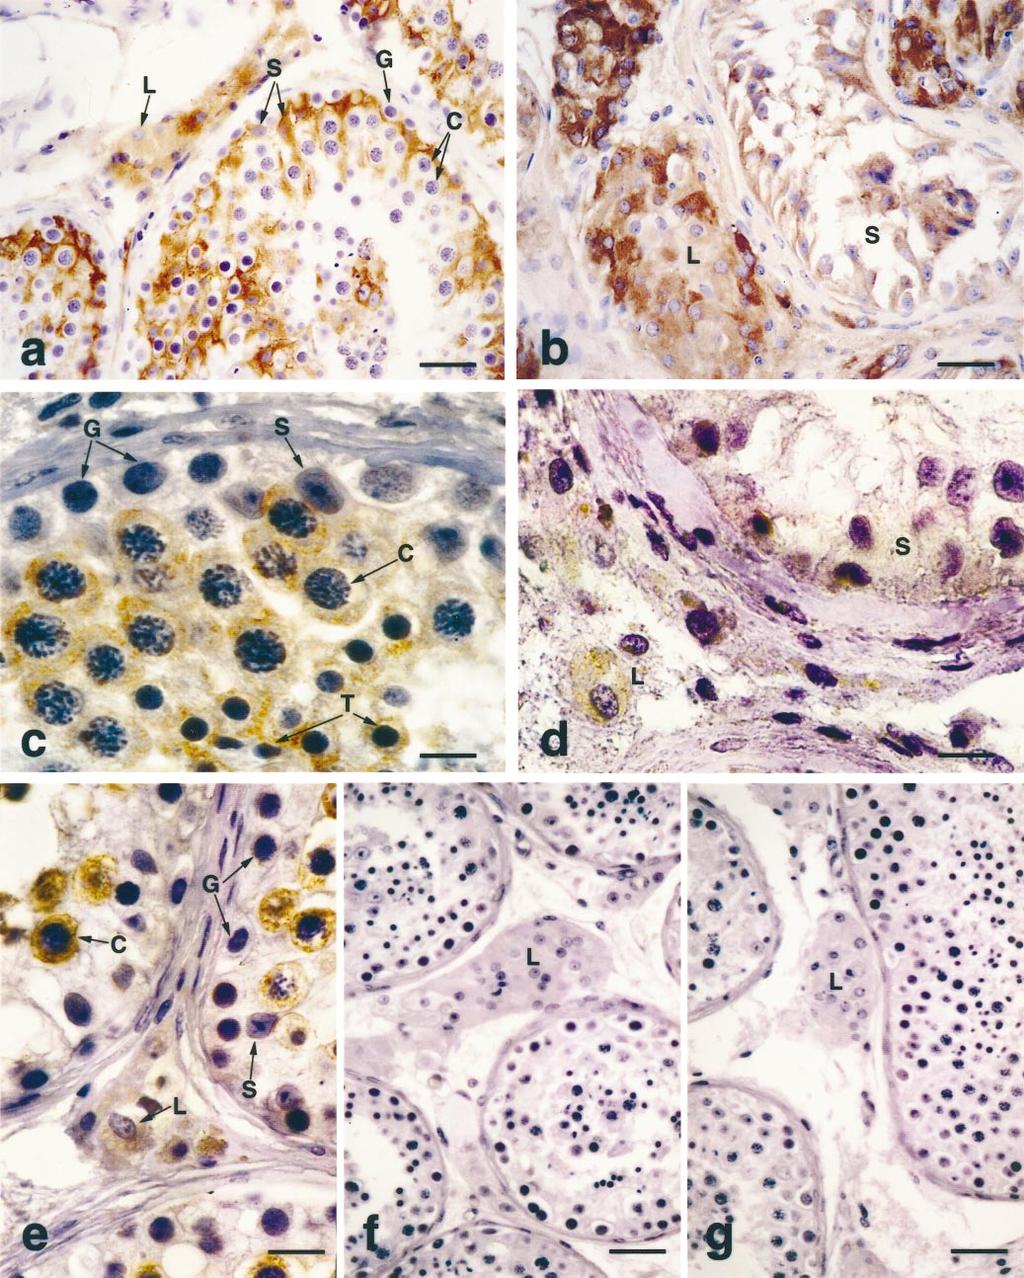 232 MARCHETTI ET AL. FIG. 1. Immunolocalization of inhibin and B subunits in human adult testes. a, b) Immunostaining for subunit in testes with normal spermatogenesis (a) or Sertoli cell only (b).